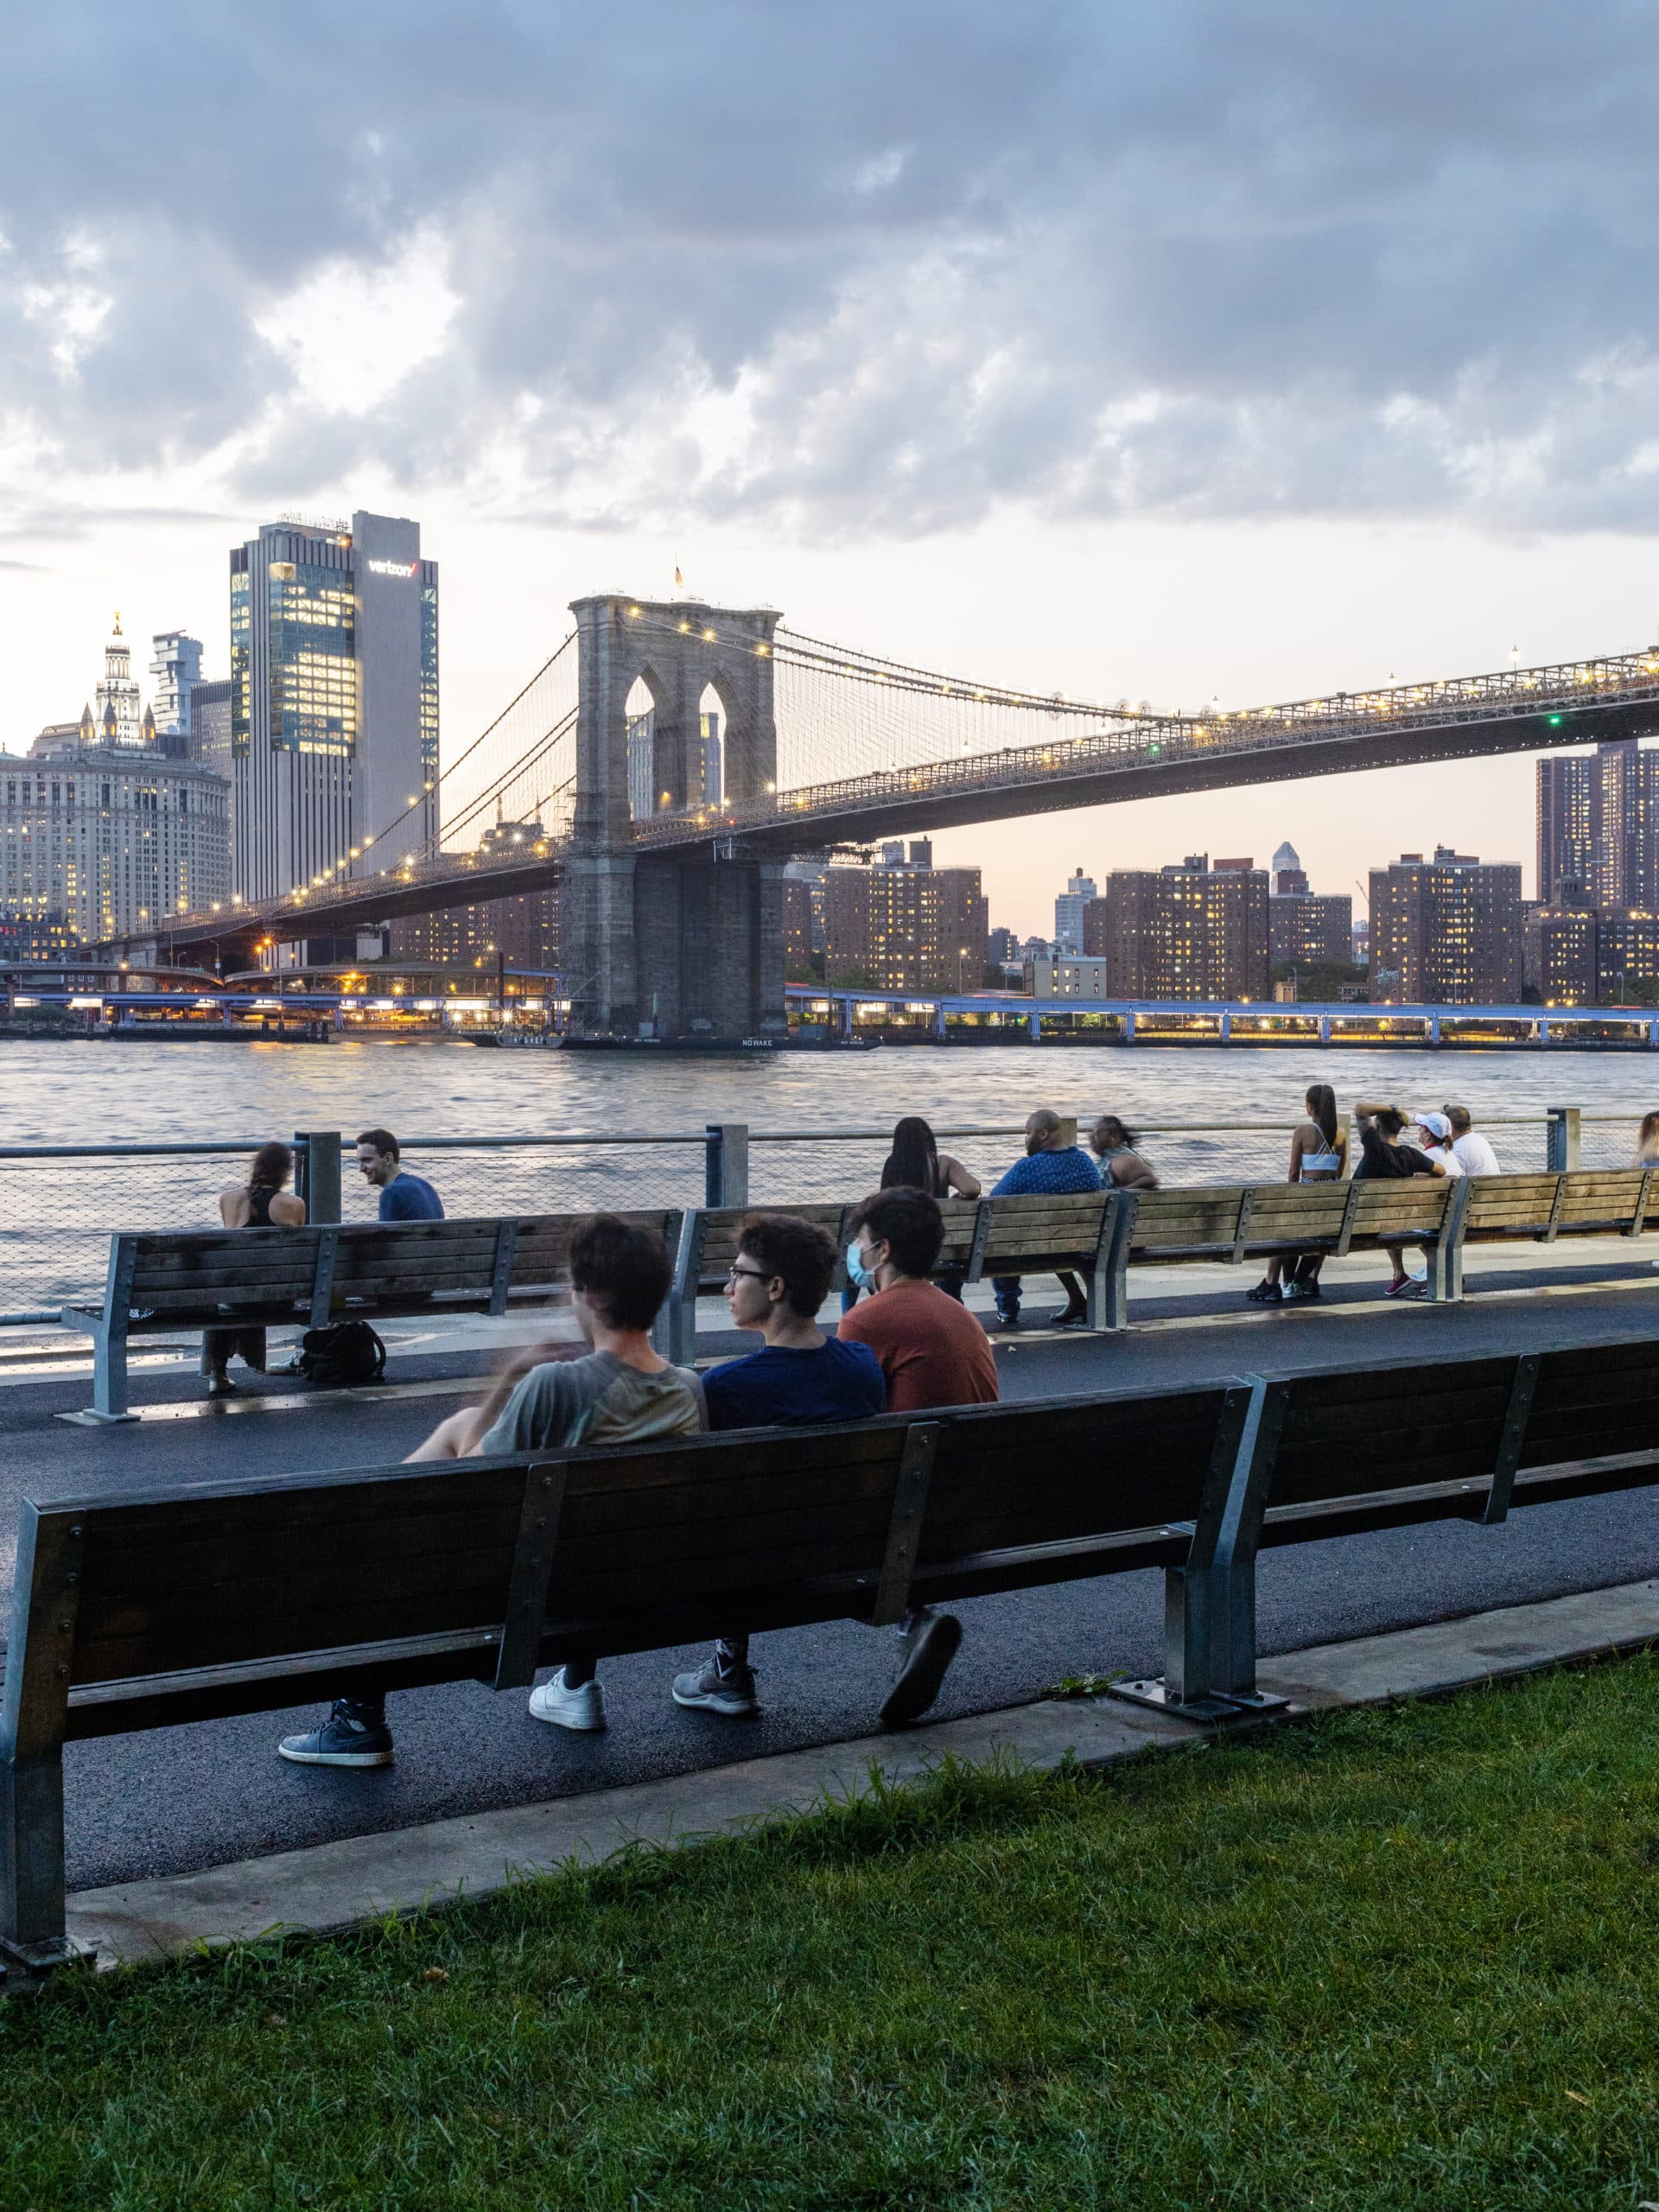 Peope sitting on benches on the Pier 1 Promenade looking out at the Brooklyn Bridge at sunset.